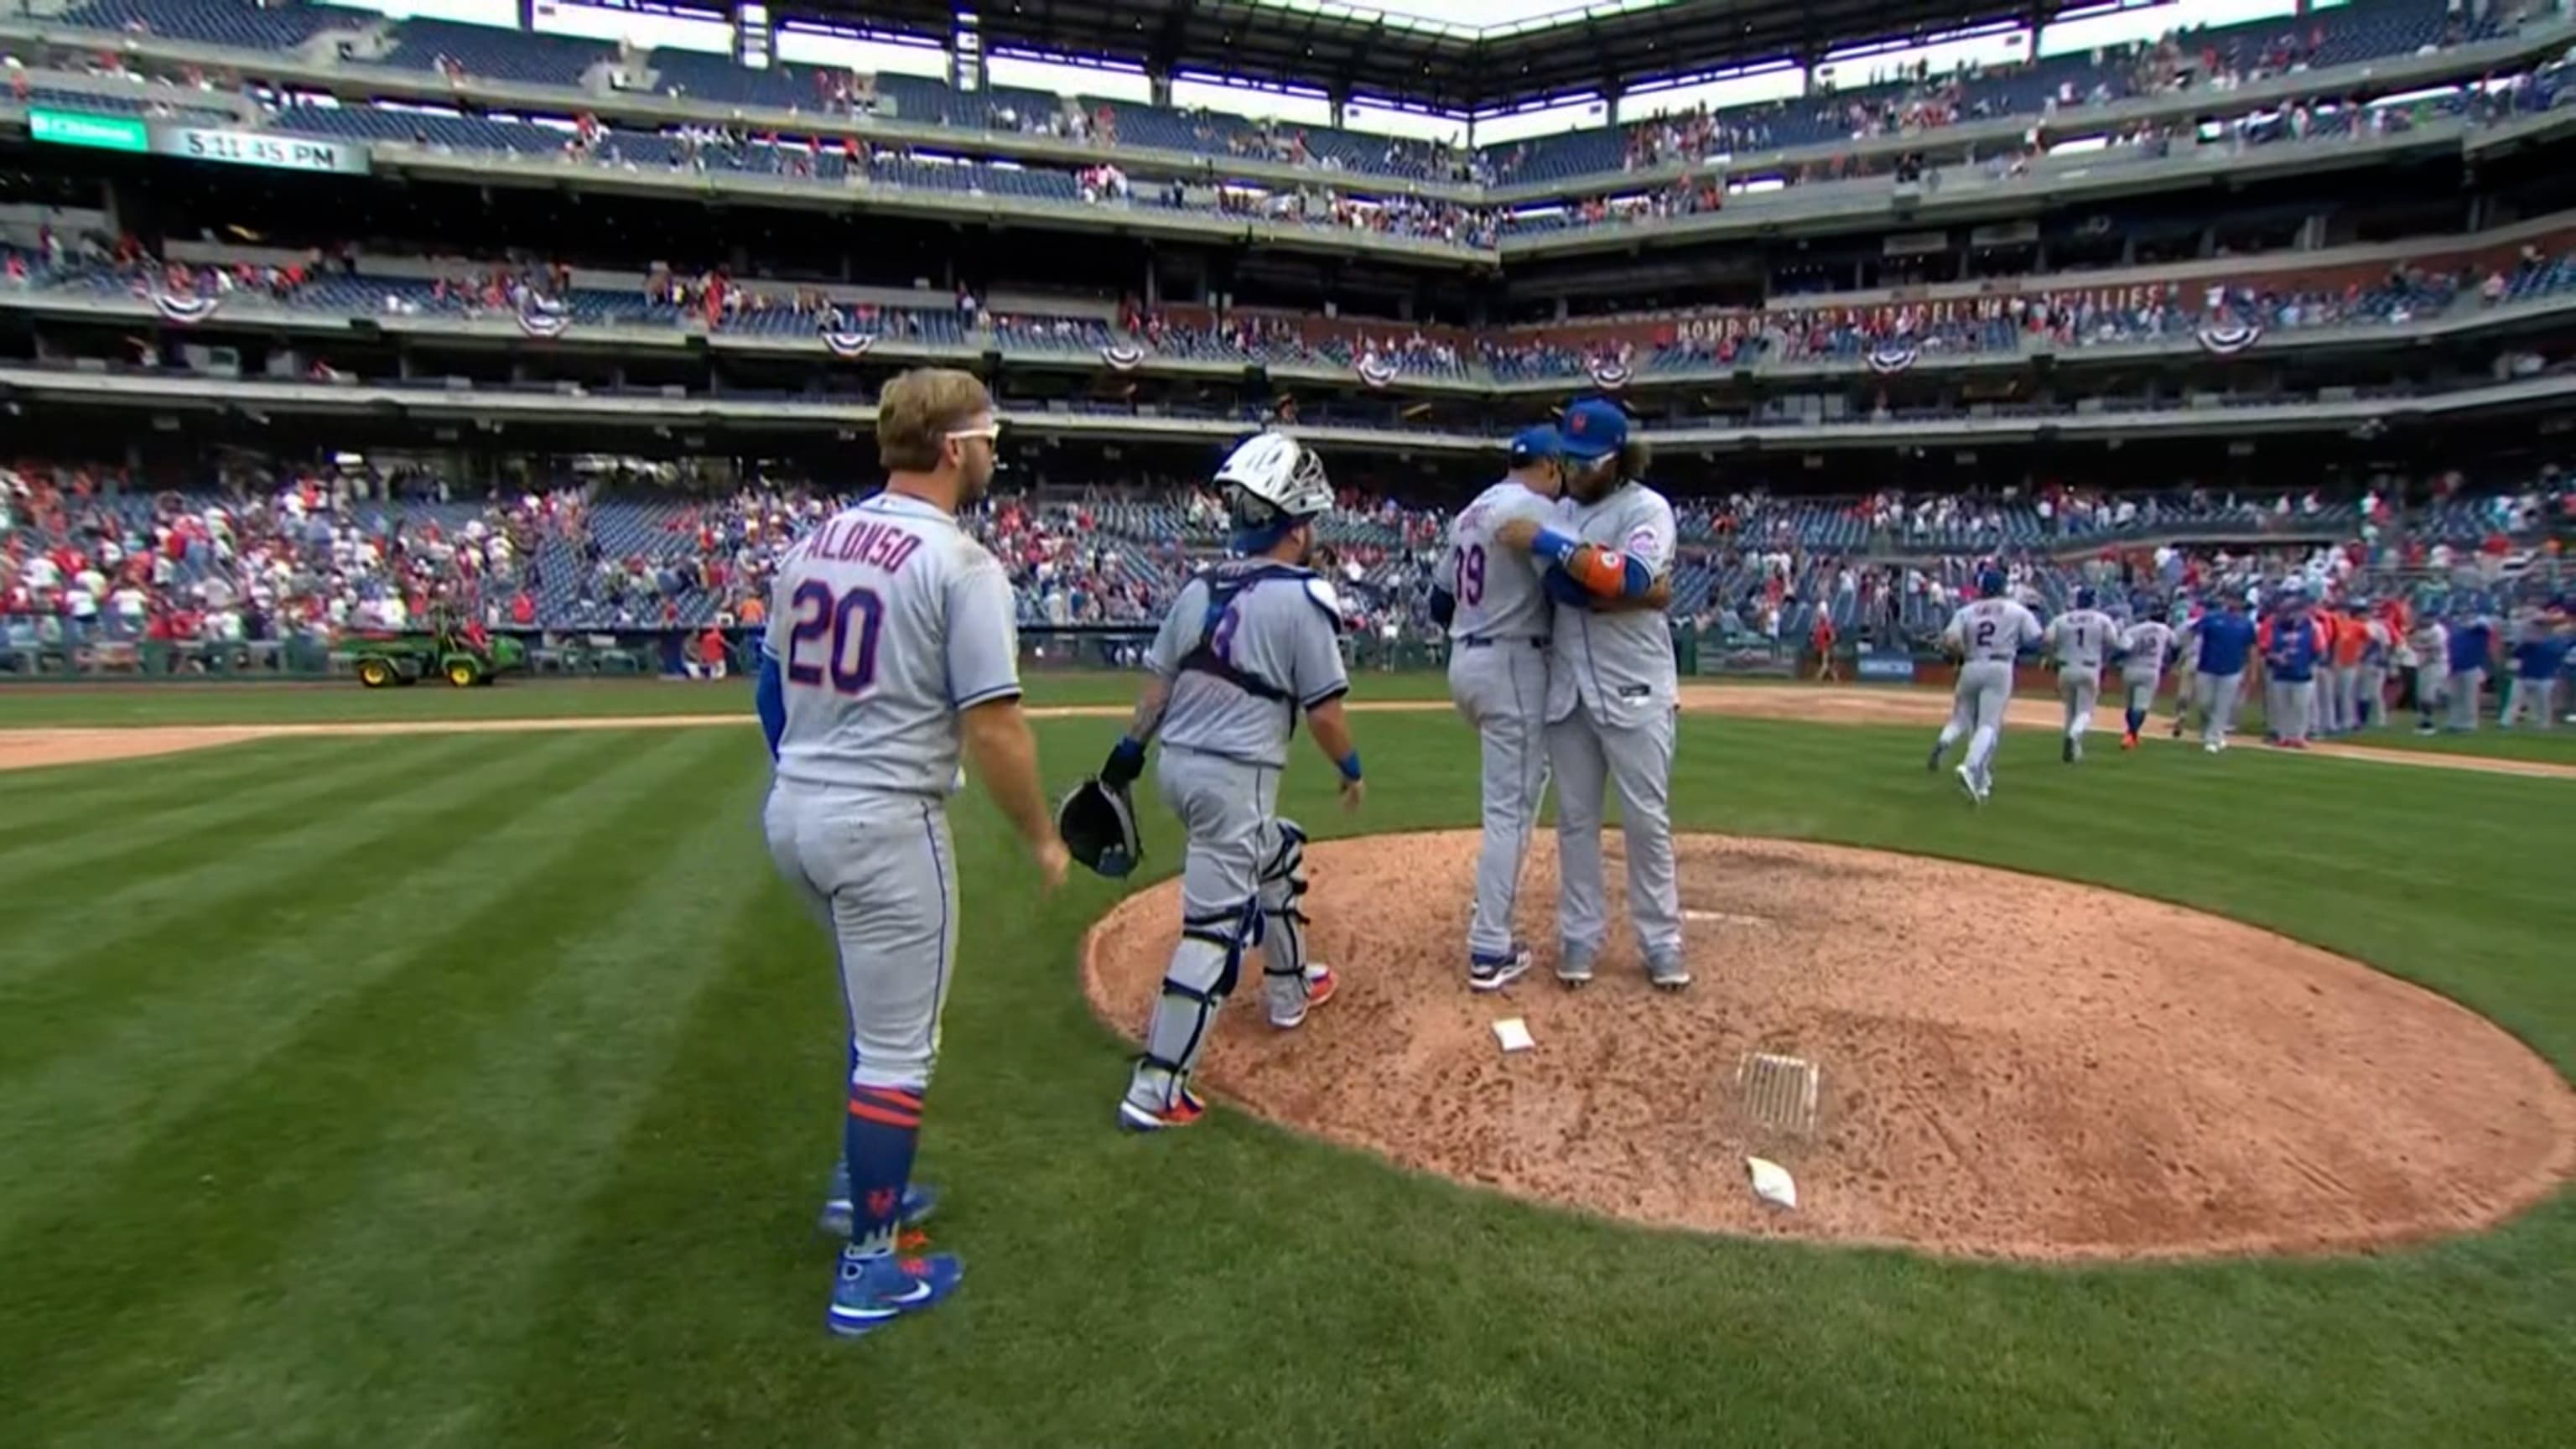 Alonso homers, drives in 4 as Mets hold off Phillies 8-6